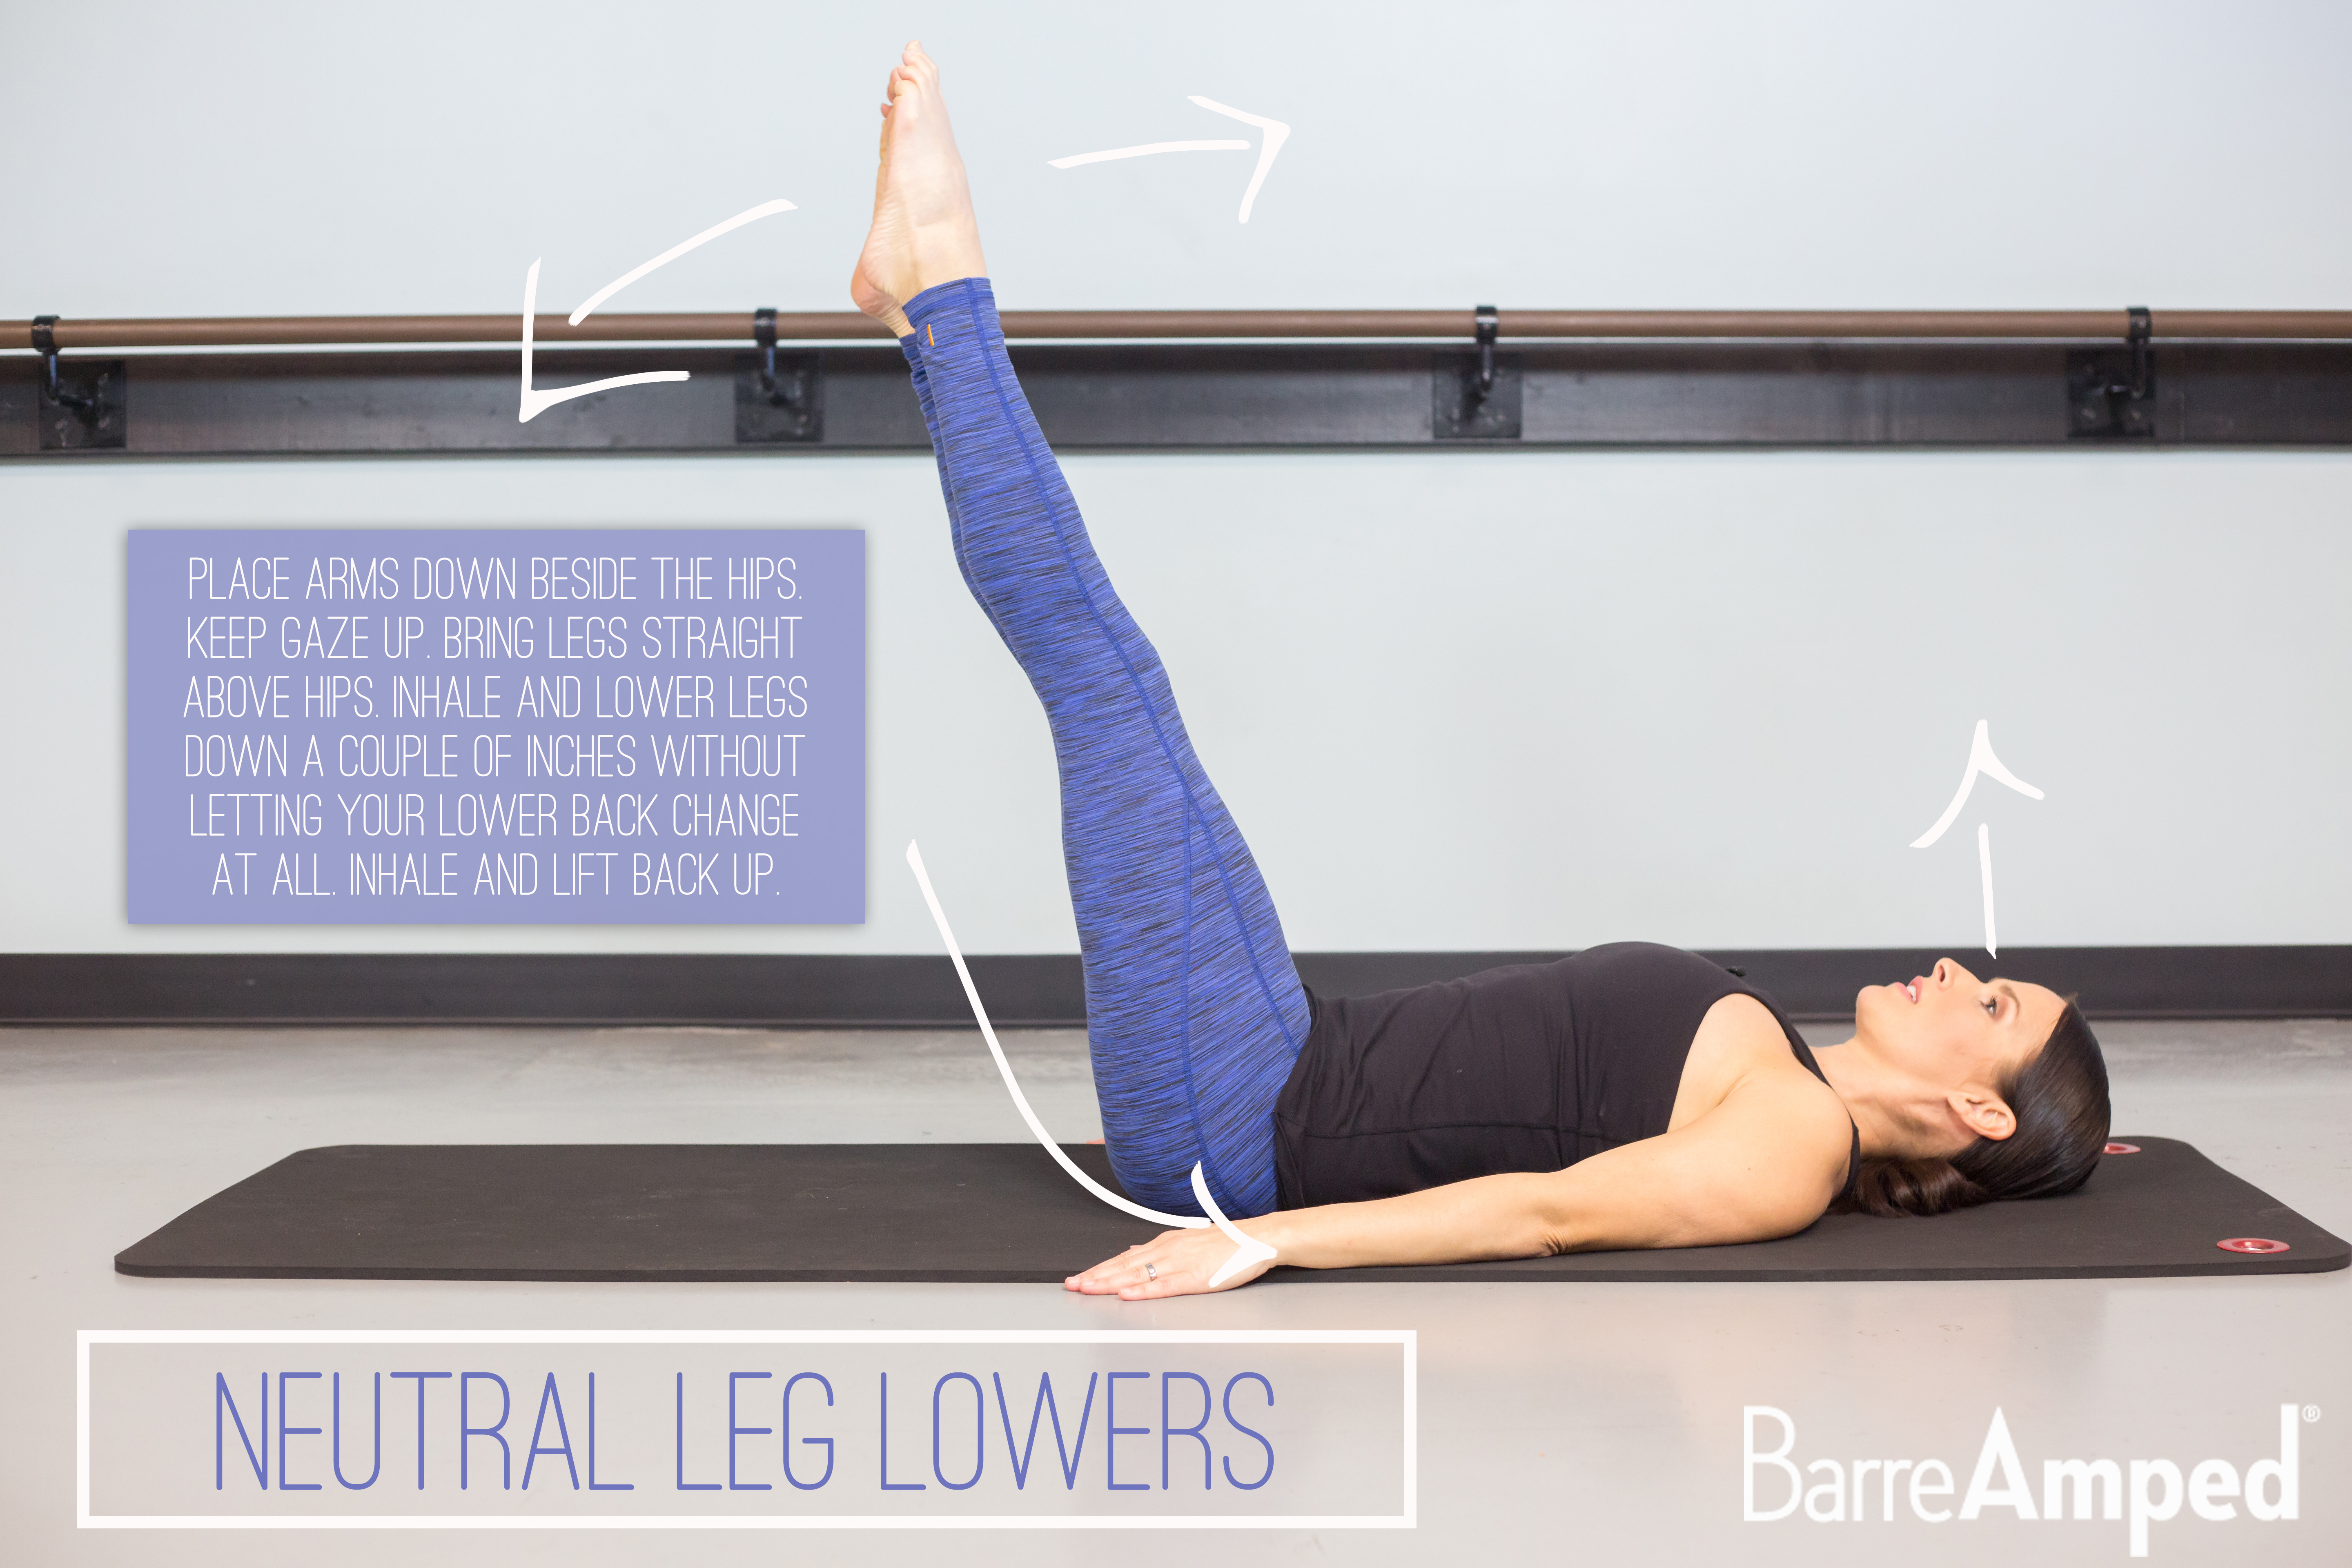 Abs on Fire: Ab Workout from BarreAmped